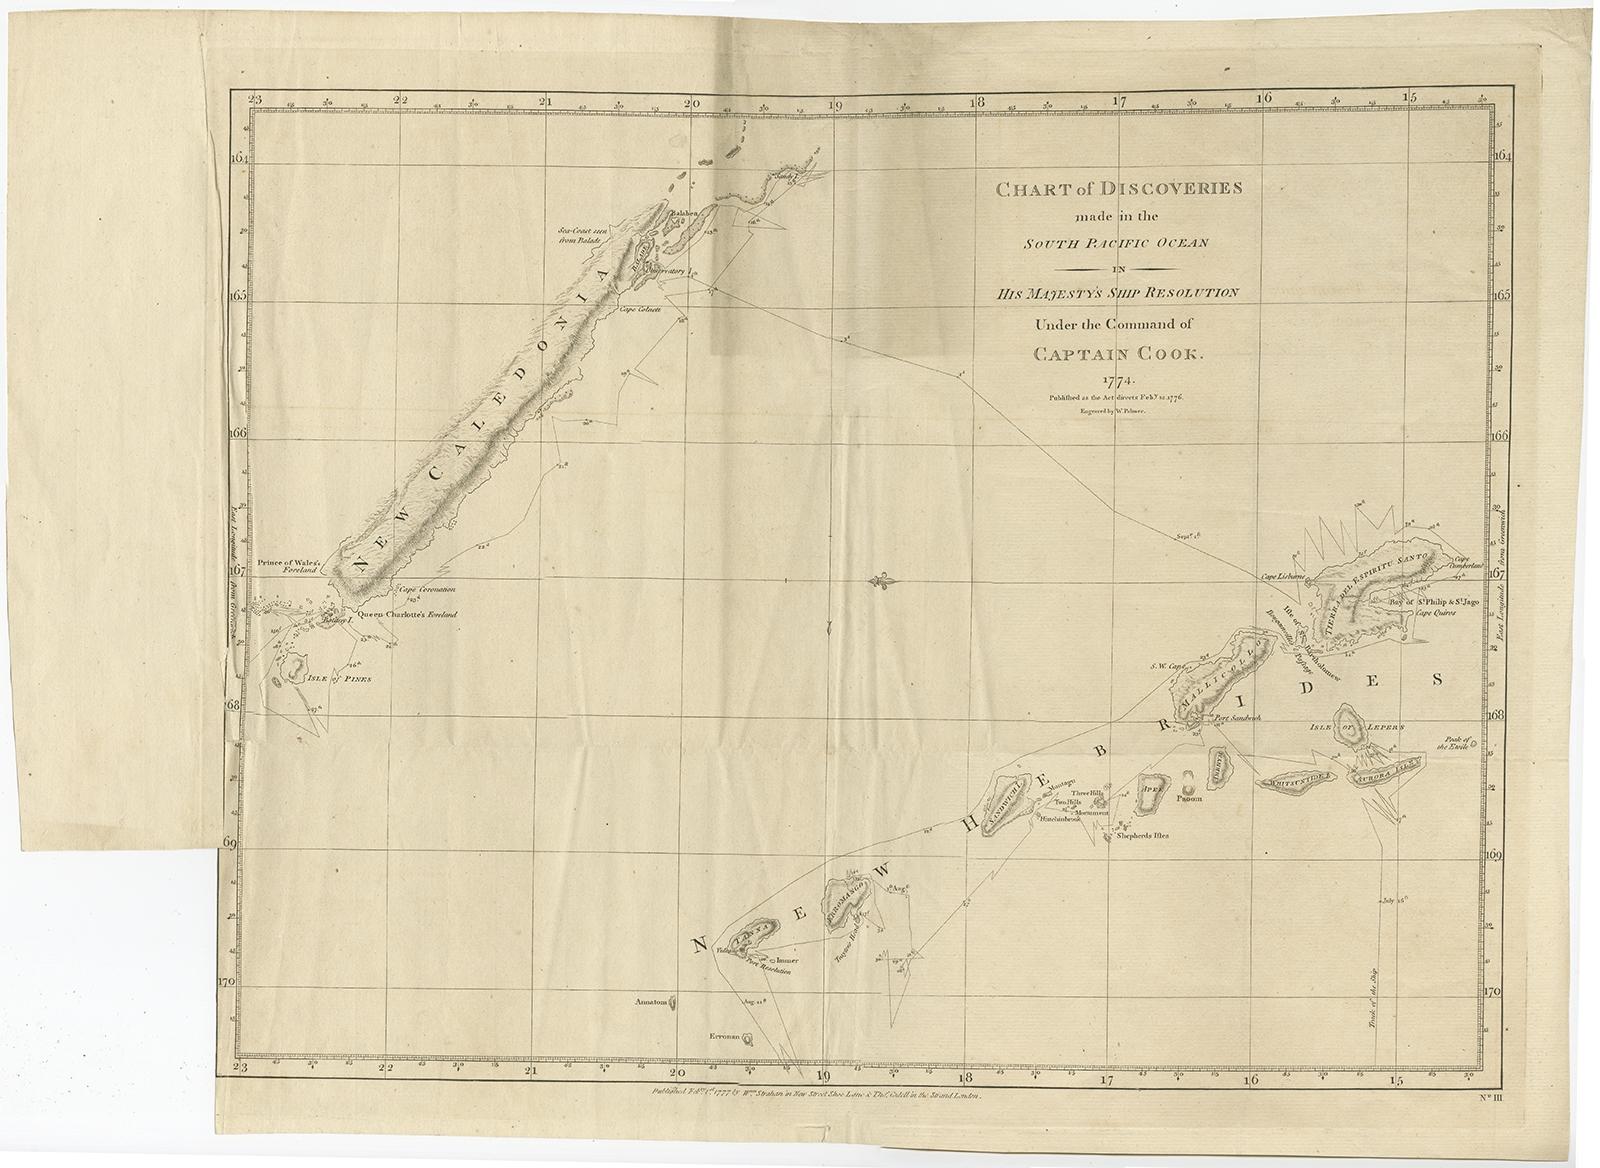 Antique map titled 'Chart of Discoveries made in the South Pacific Ocean'. 

Rare engraving from the official British Admiralty sanctioned edition of the accounts of Cook’s second voyage. All other later copies made of this image by other